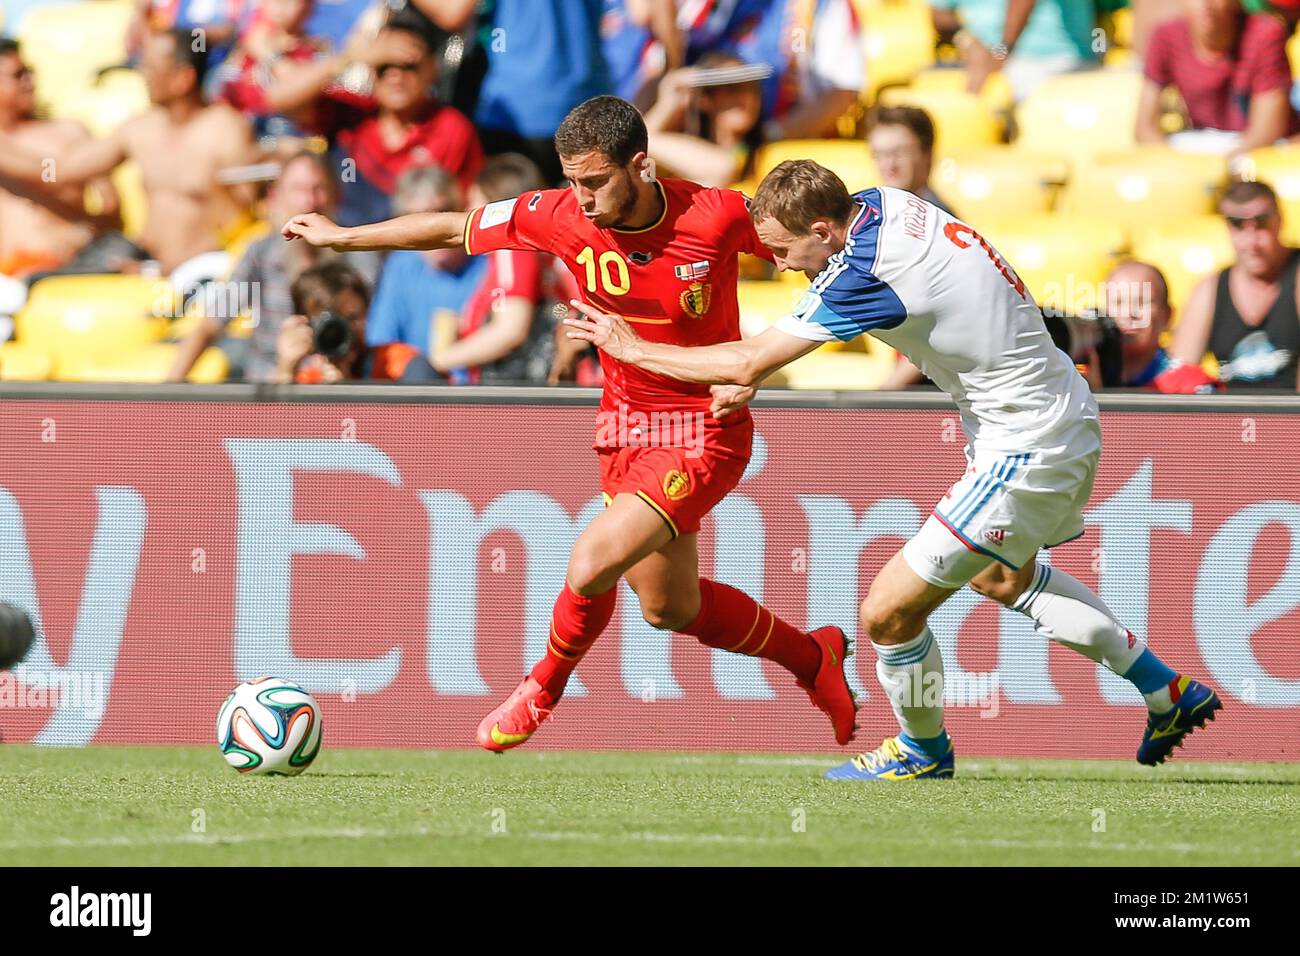 20140622 - RIO DE JANEIRO, BRAZIL: Belgium's Eden Hazard and Russia's Aleksei Anatolyevich Kozlov in action during a soccer game between Belgian national team The Red Devils and Russia in Rio de Janeiro, Brazil, the second game in Group H of the first round of the 2014 FIFA World Cup, Sunday 22 June 2014. BELGA PHOTO BRUNO FAHY Stock Photo